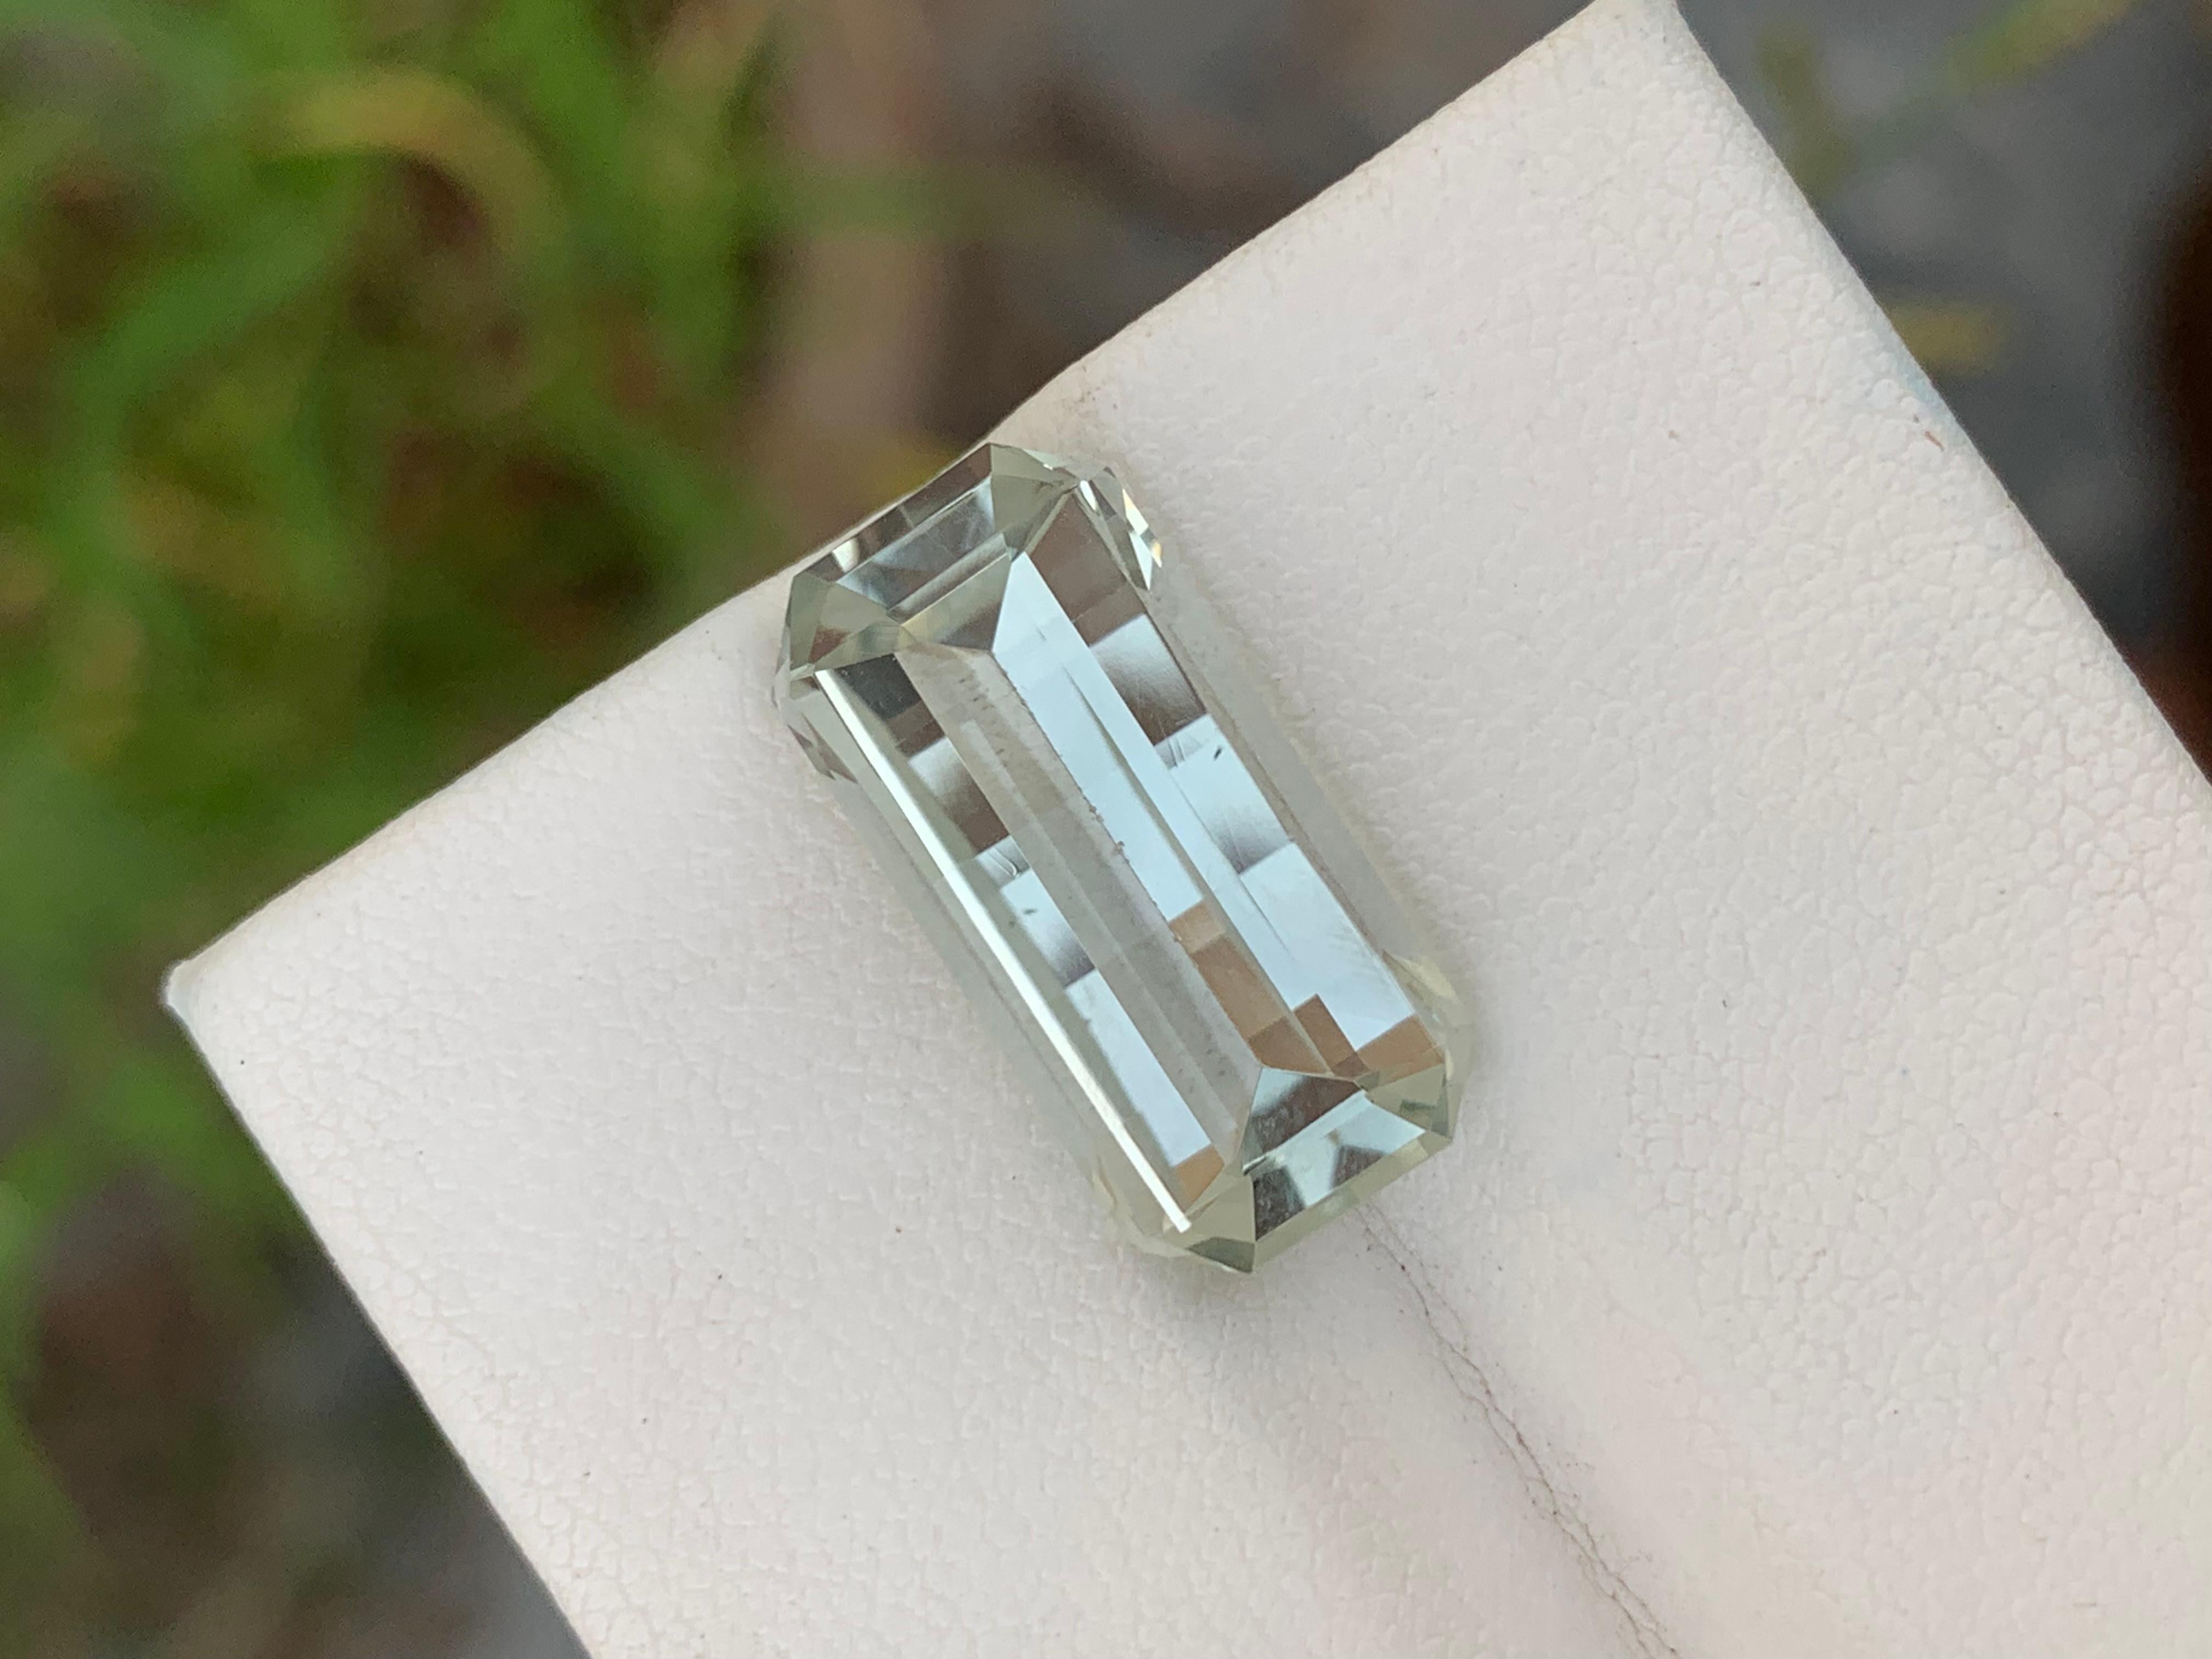 Faceted Prasiolite 
Weight: 9.90 Carats
Dimension: 18.8x9.3x7.6 Mm
Origin: Brazil
Color: Light Green
Shape: Emerald Bar
Cut: Pixel Cut / Pixelated 
Certificate: On Customer Demand
Green amethyst, also known as prasiolite, is a captivating gemstone